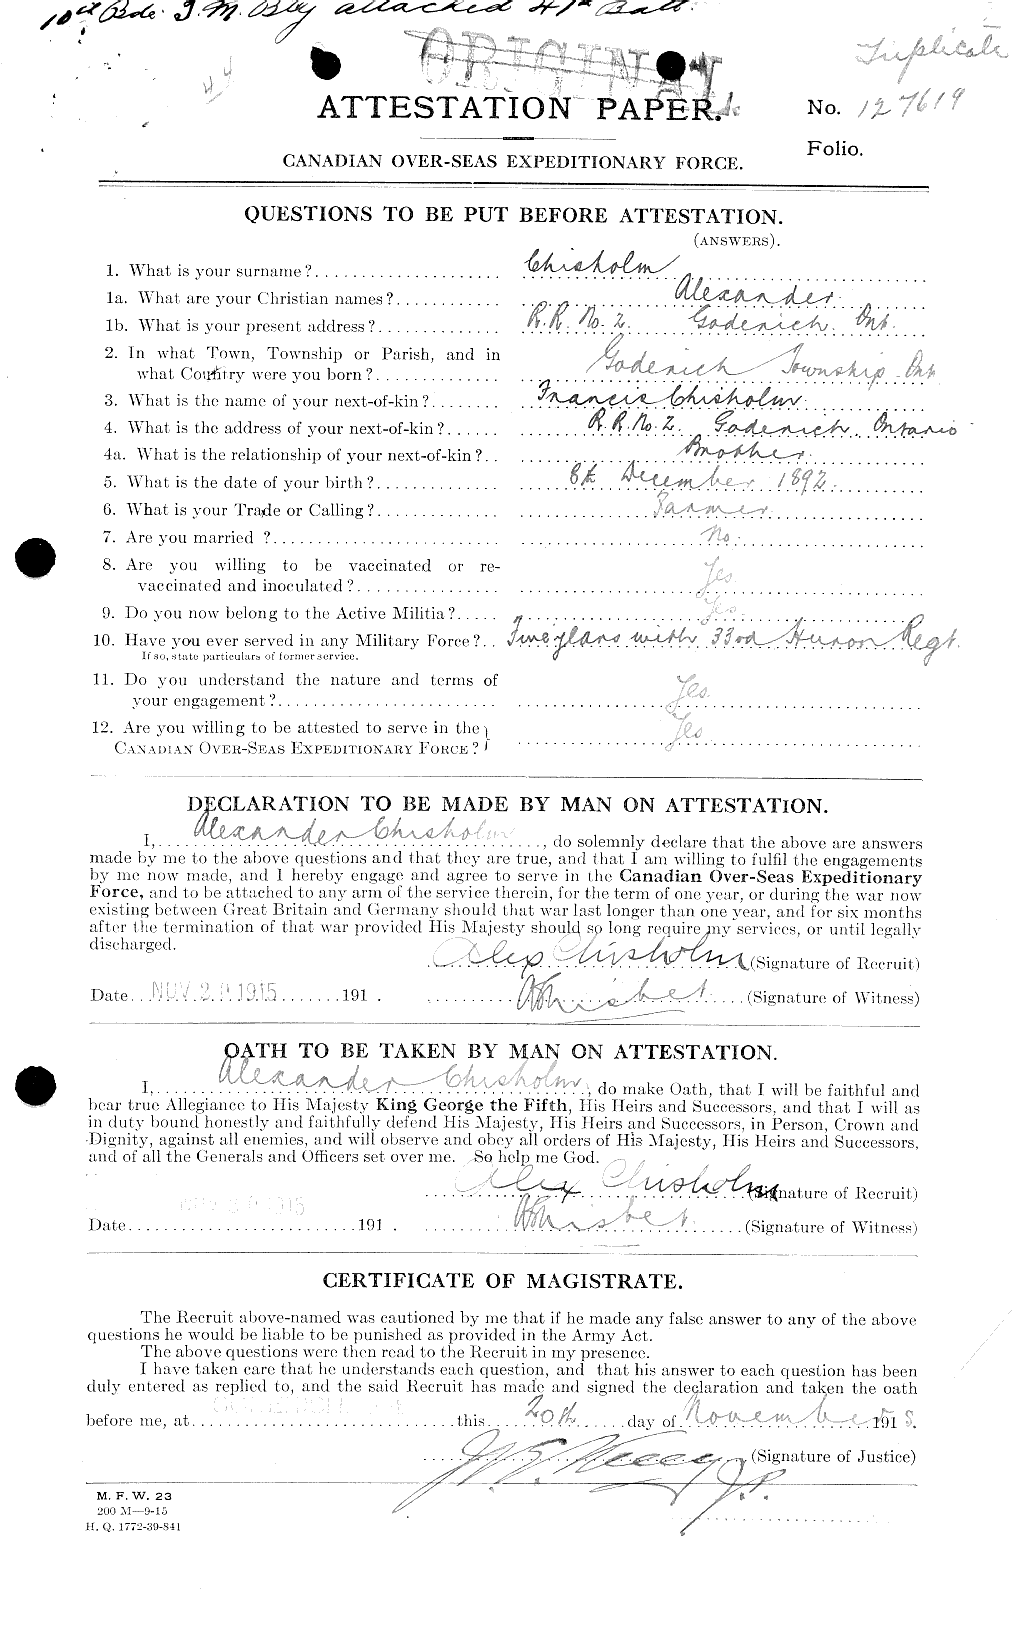 Personnel Records of the First World War - CEF 018183a